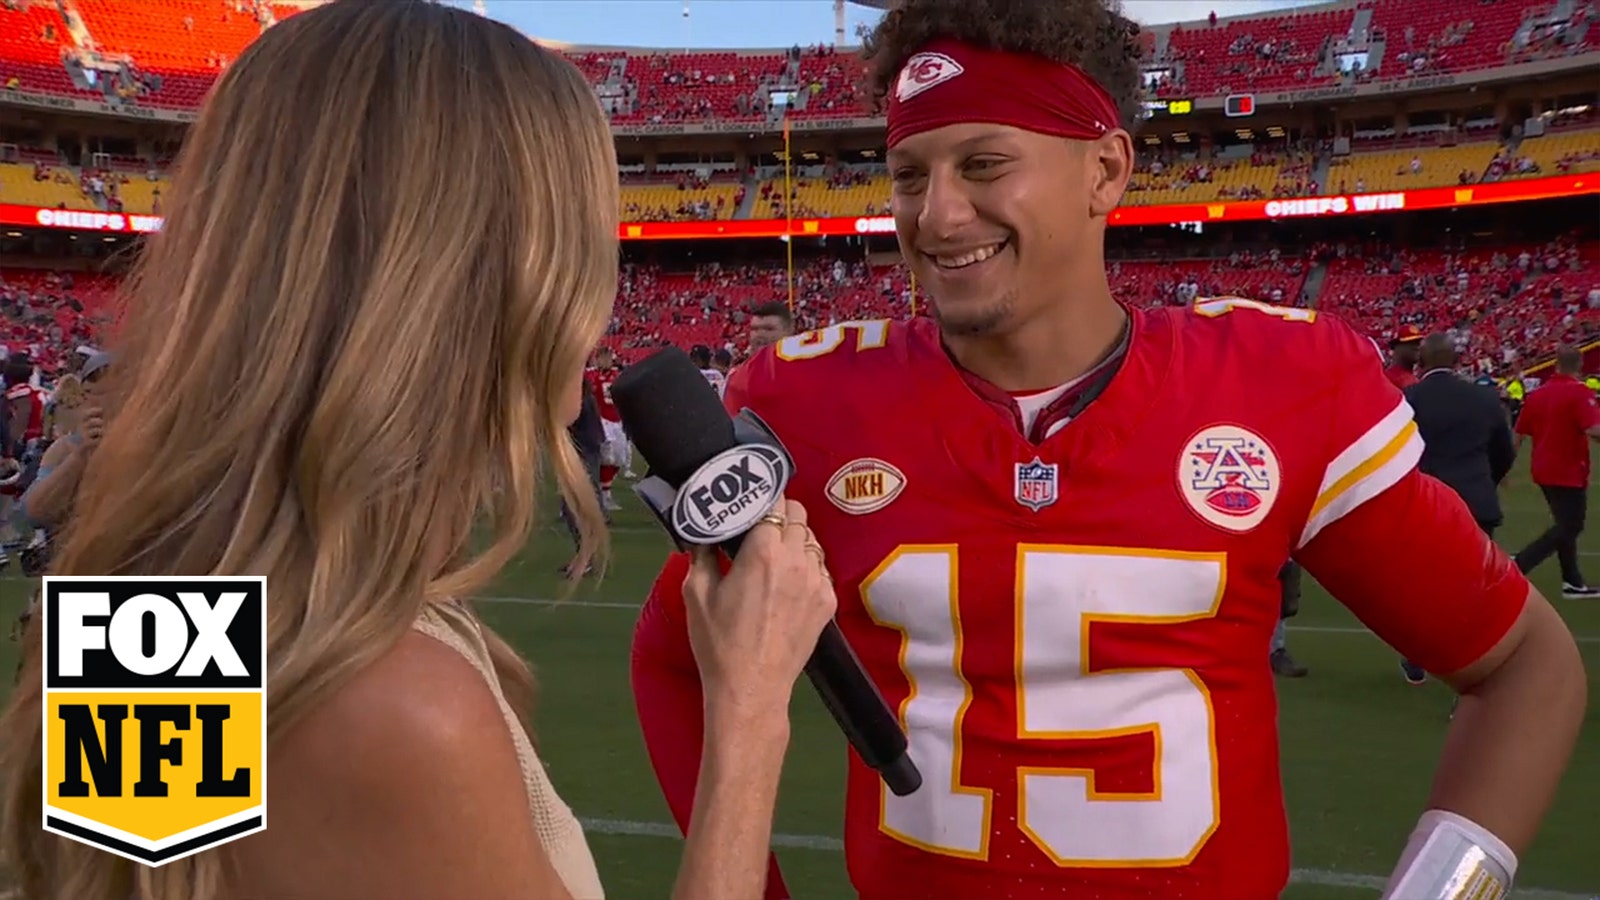 Patrick Mahomes: "Travis Kelce wanted to get in the end zone just as much as the Swifties wanted him to." 